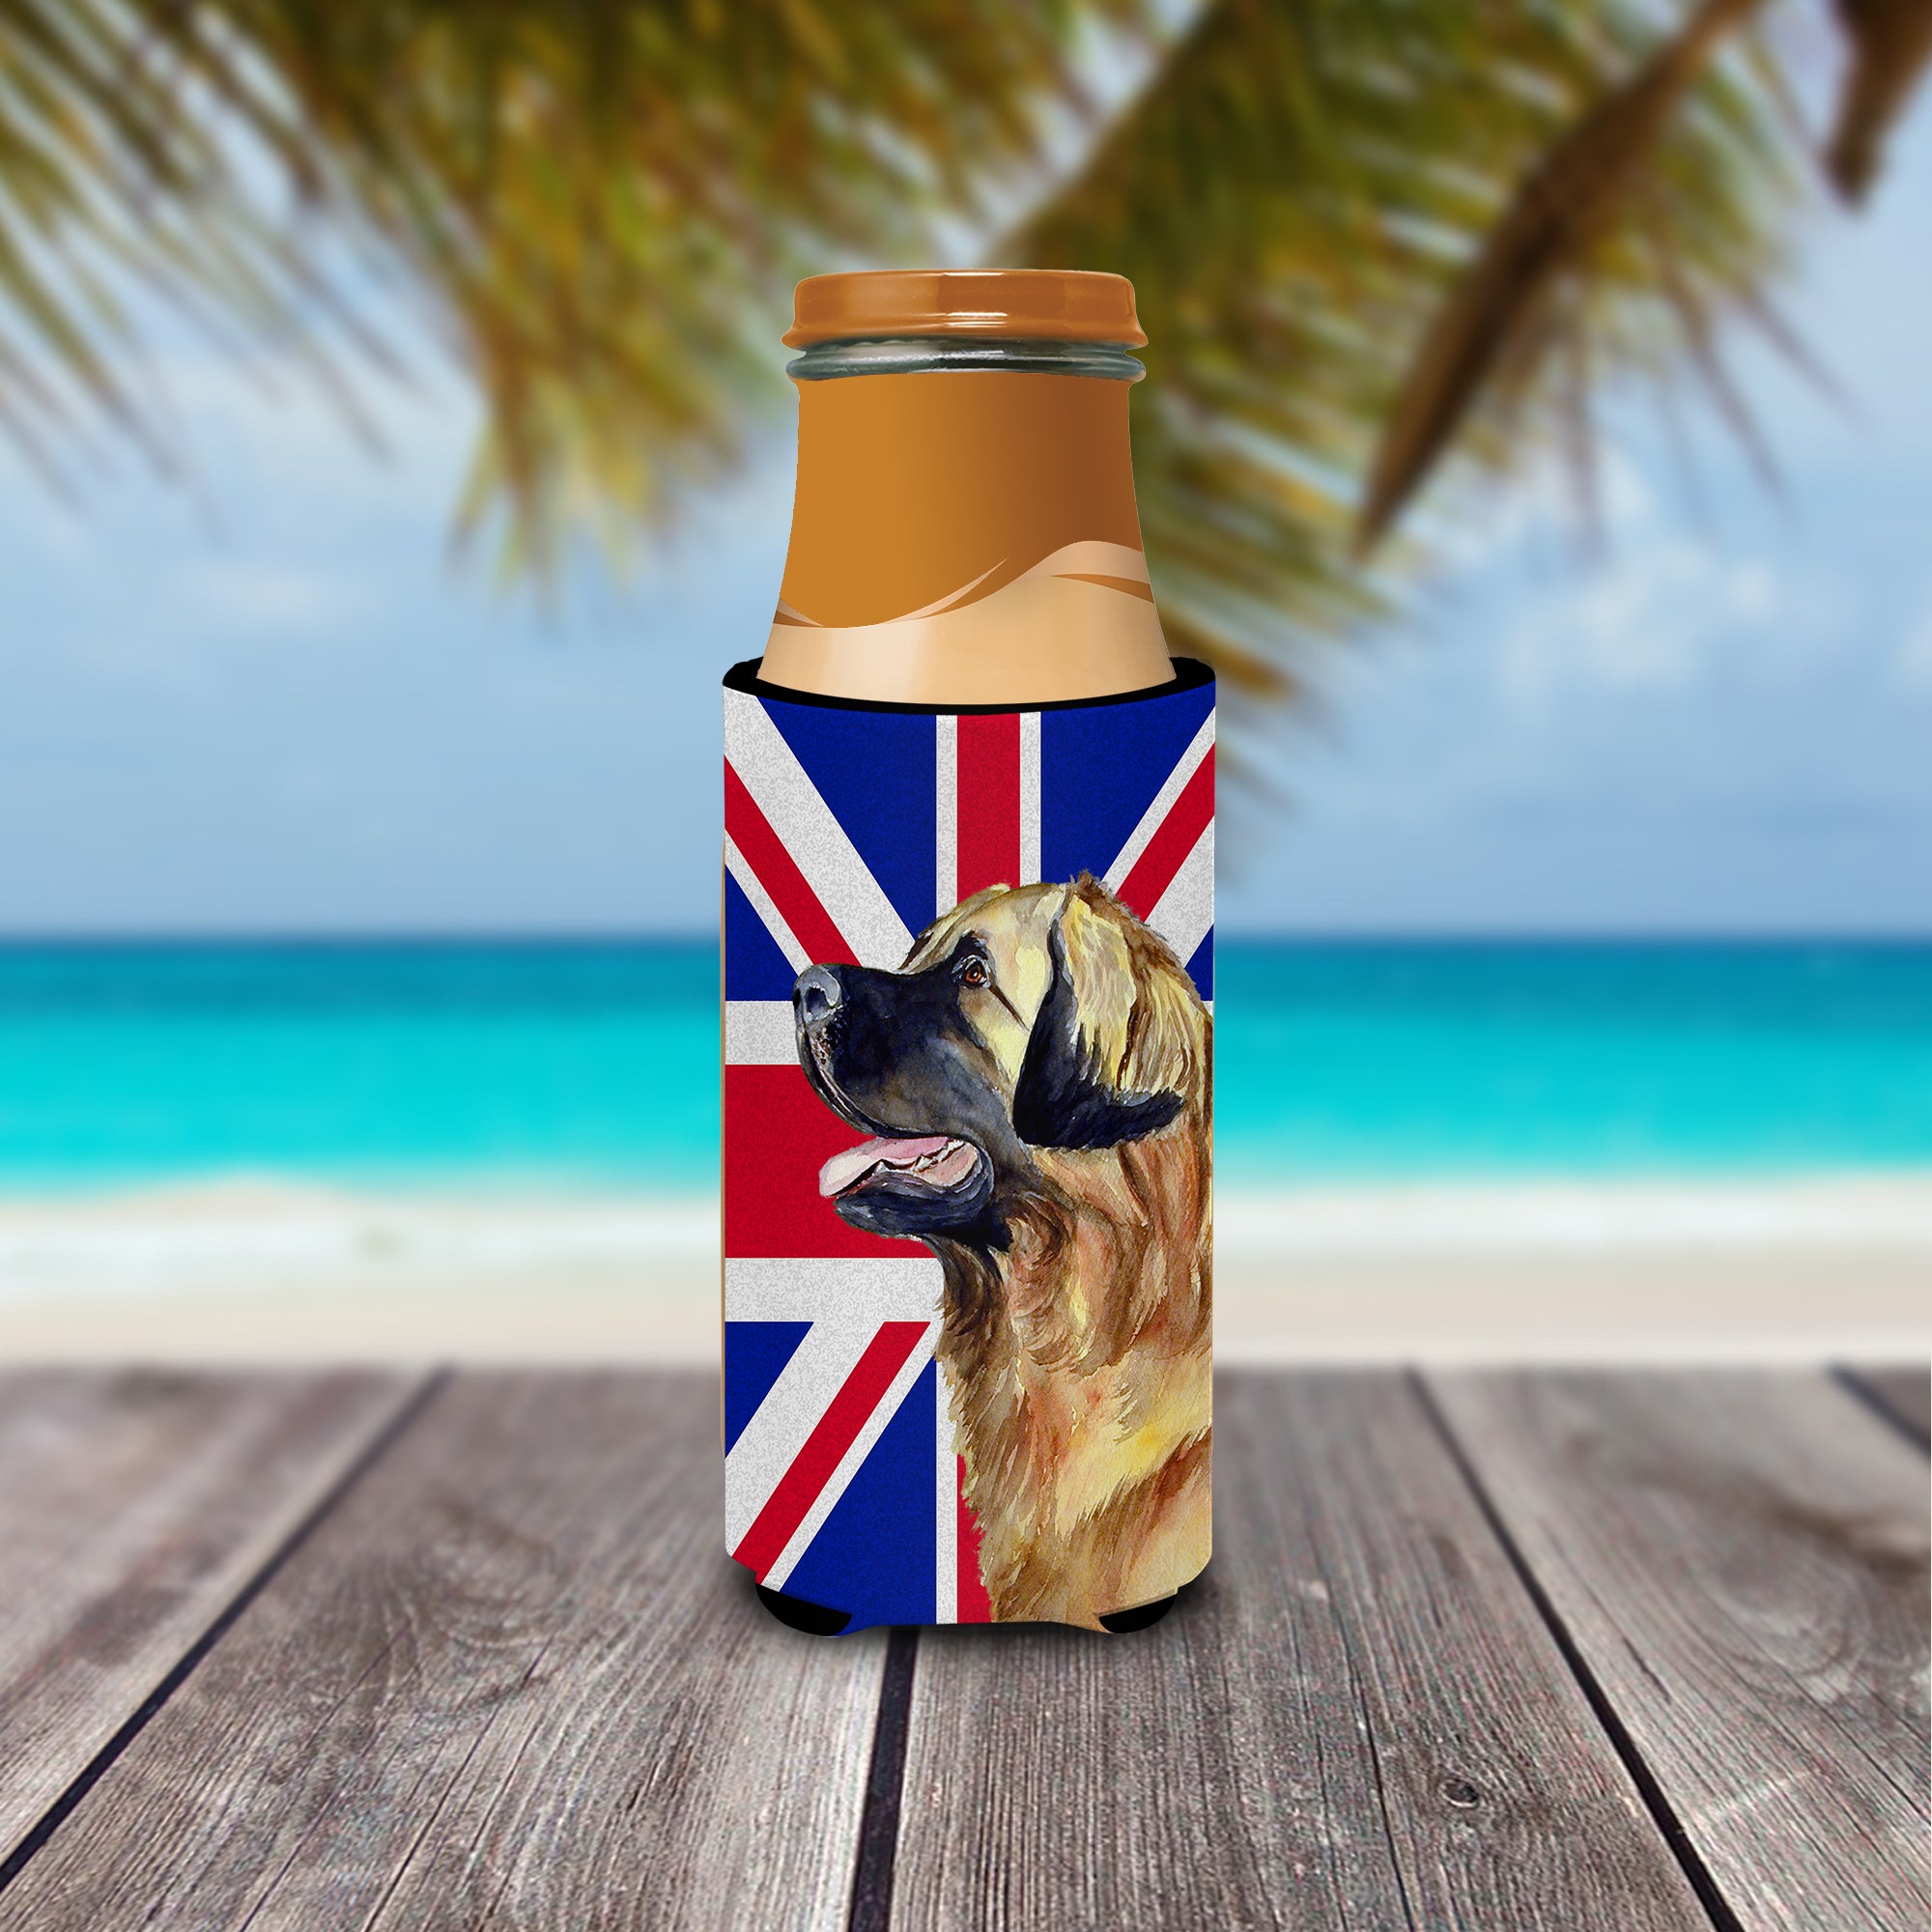 Leonberger with English Union Jack British Flag Ultra Beverage Insulators for slim cans LH9500MUK.